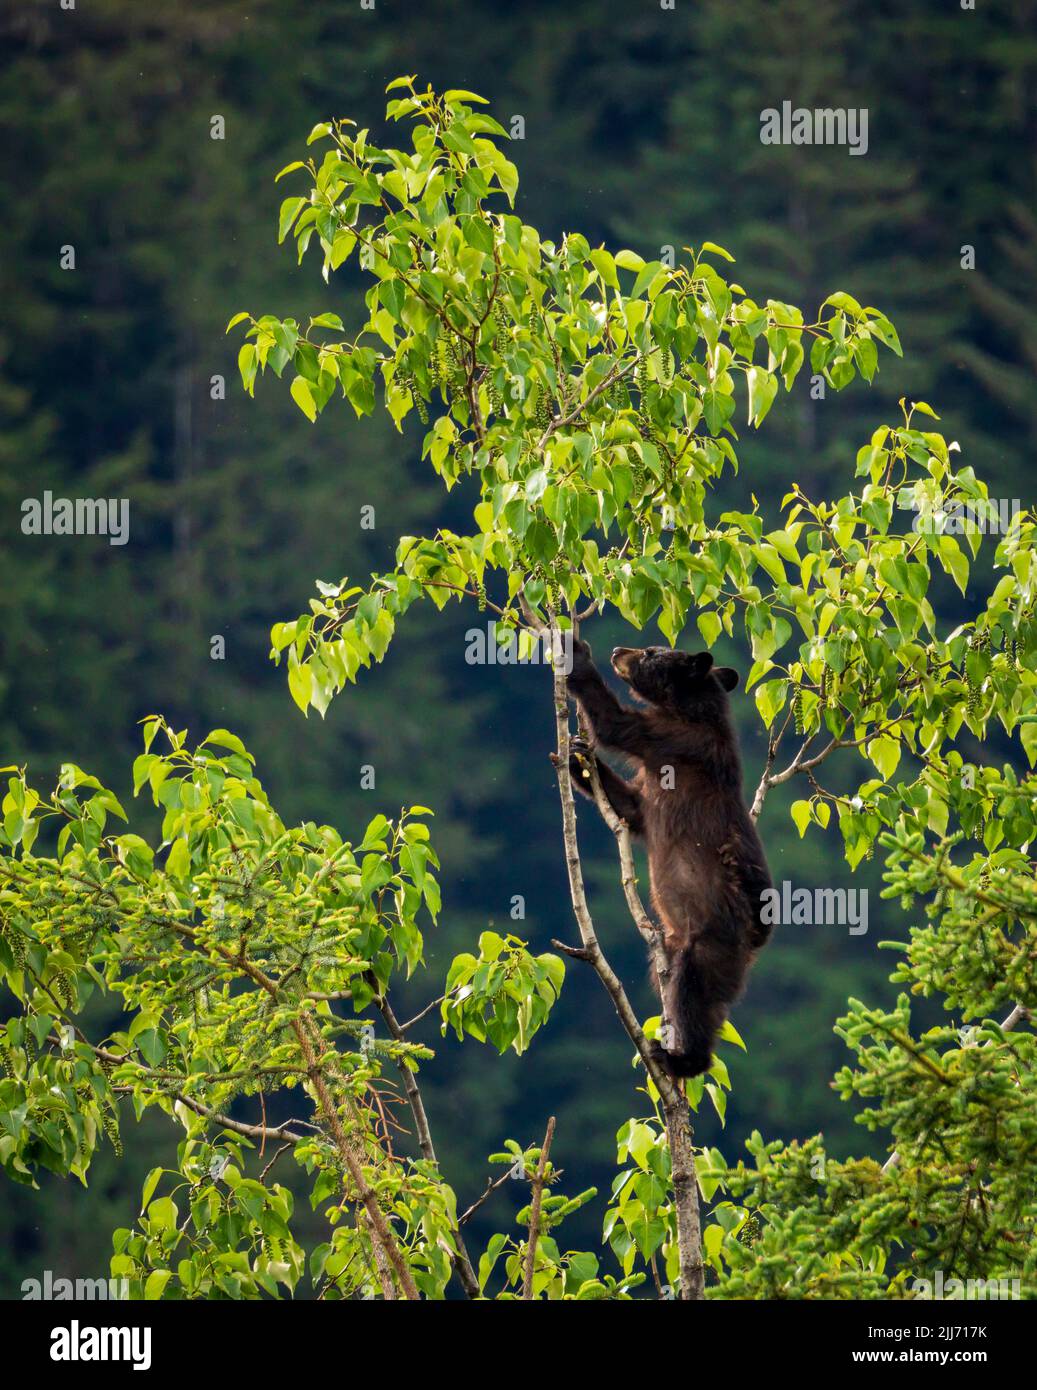 Brown or perhaps black bear cub climbing high into a tree in search of new foliage to eat in Alaska Stock Photo